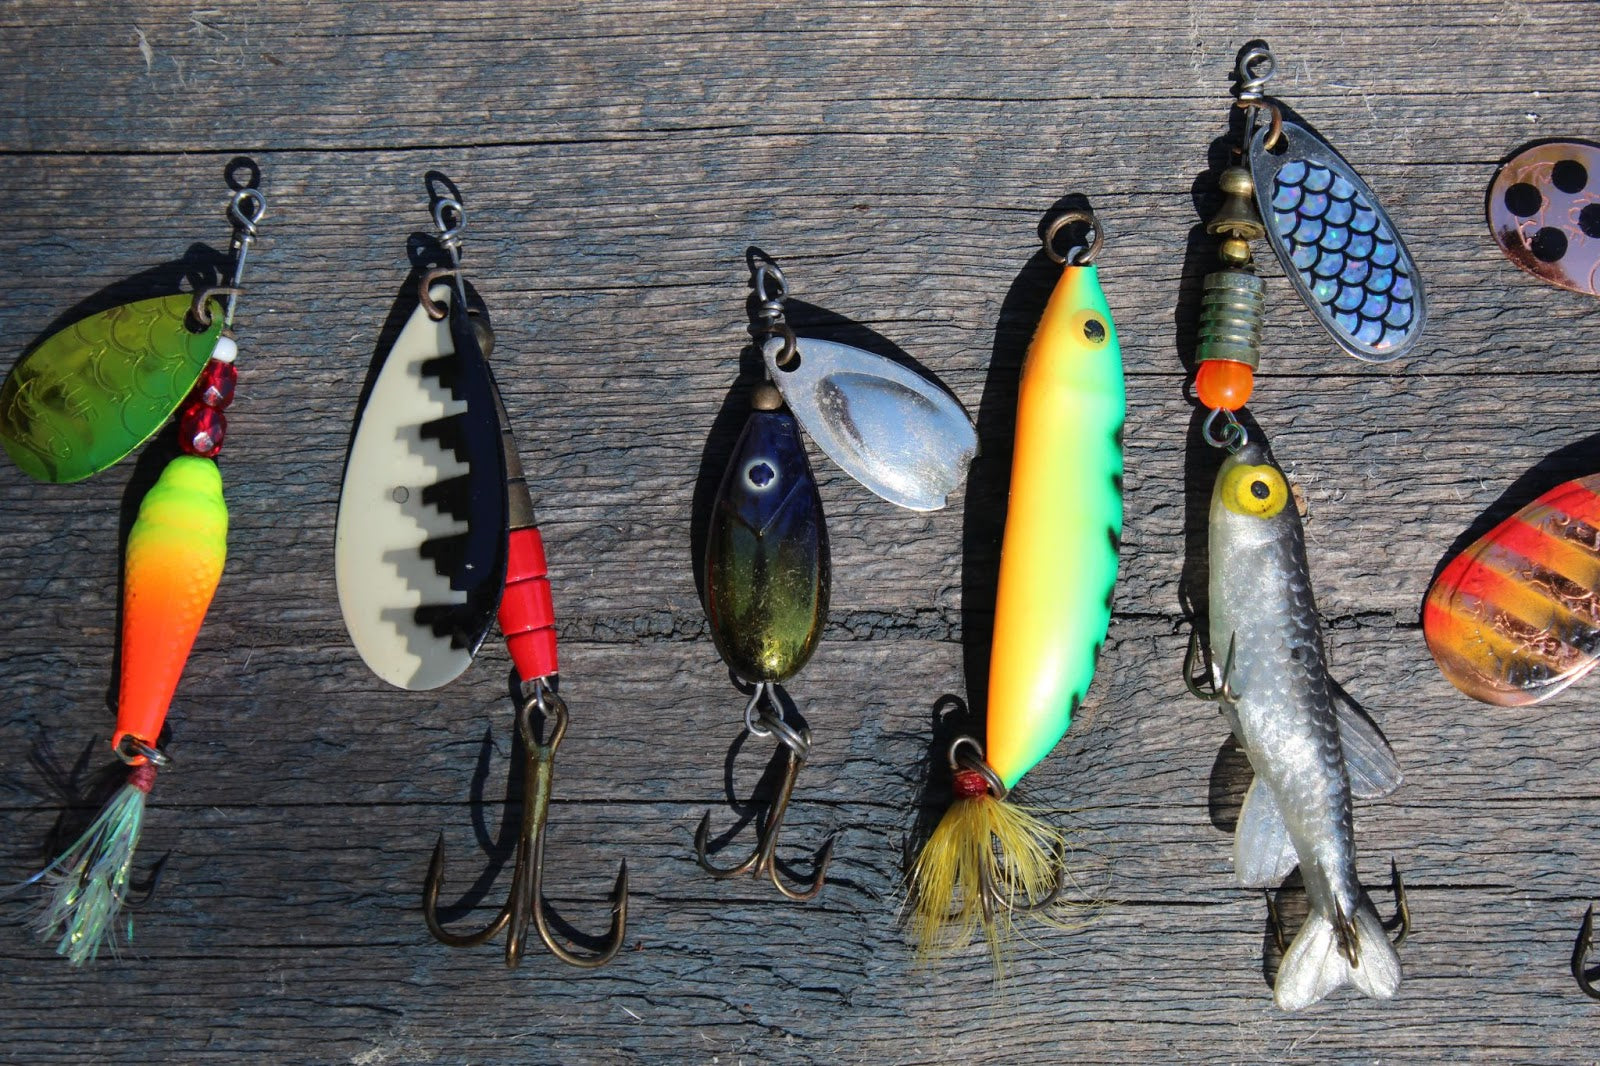 The World's SMALLEST Fishing LURES In URBAN Pond (Crazy Catch